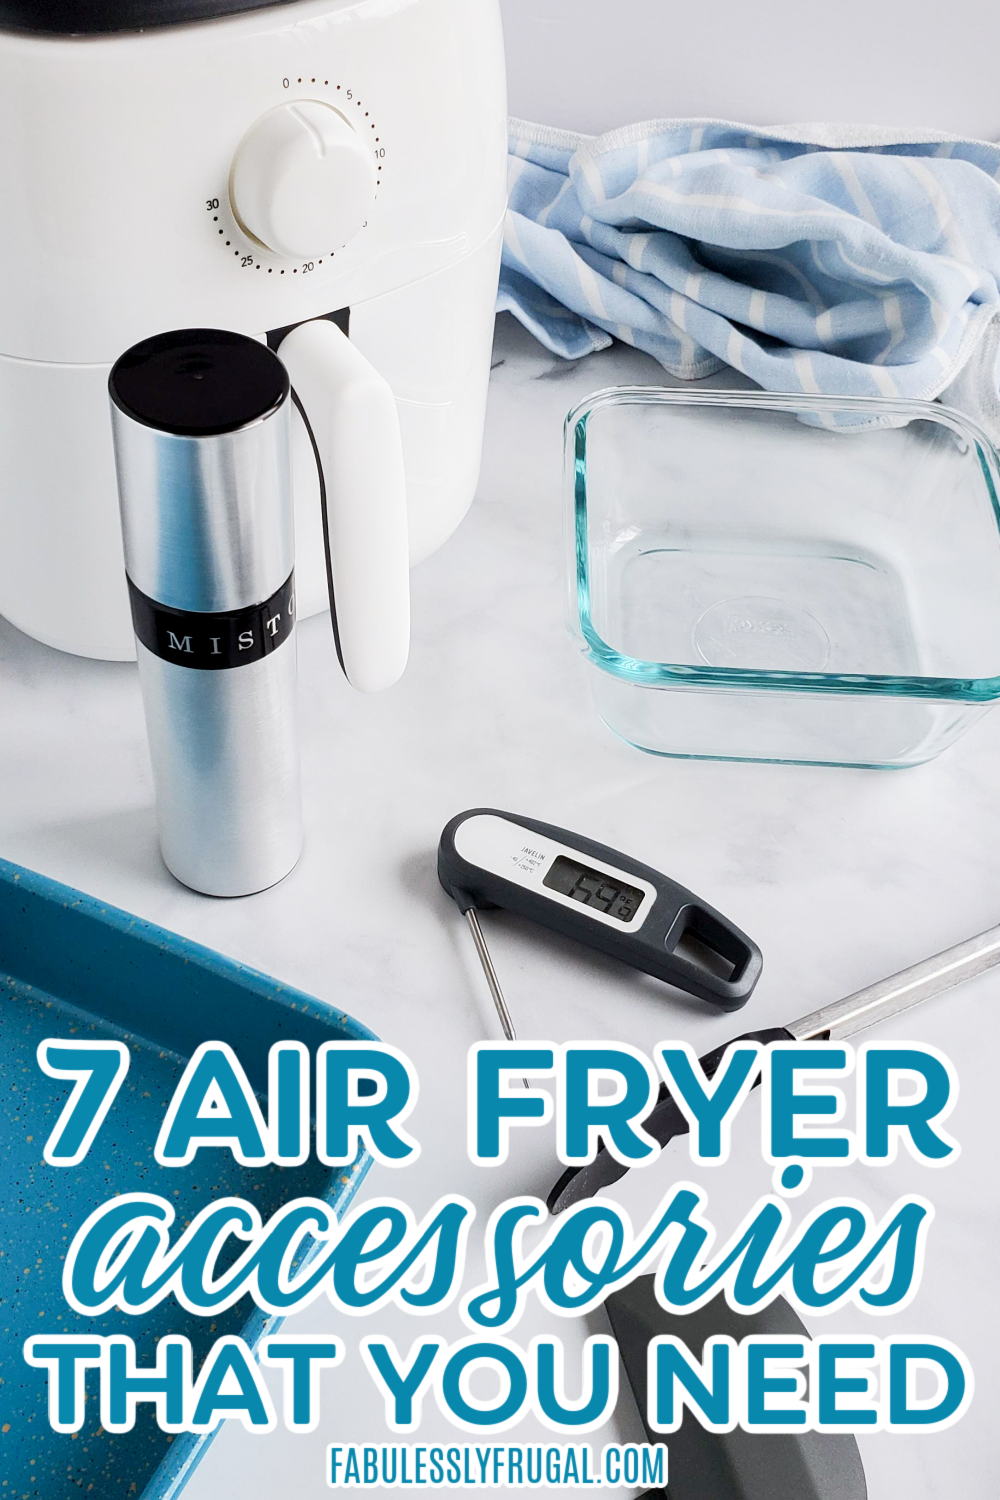 These 7 air fryer accessories will change the way you cook with your air fryer